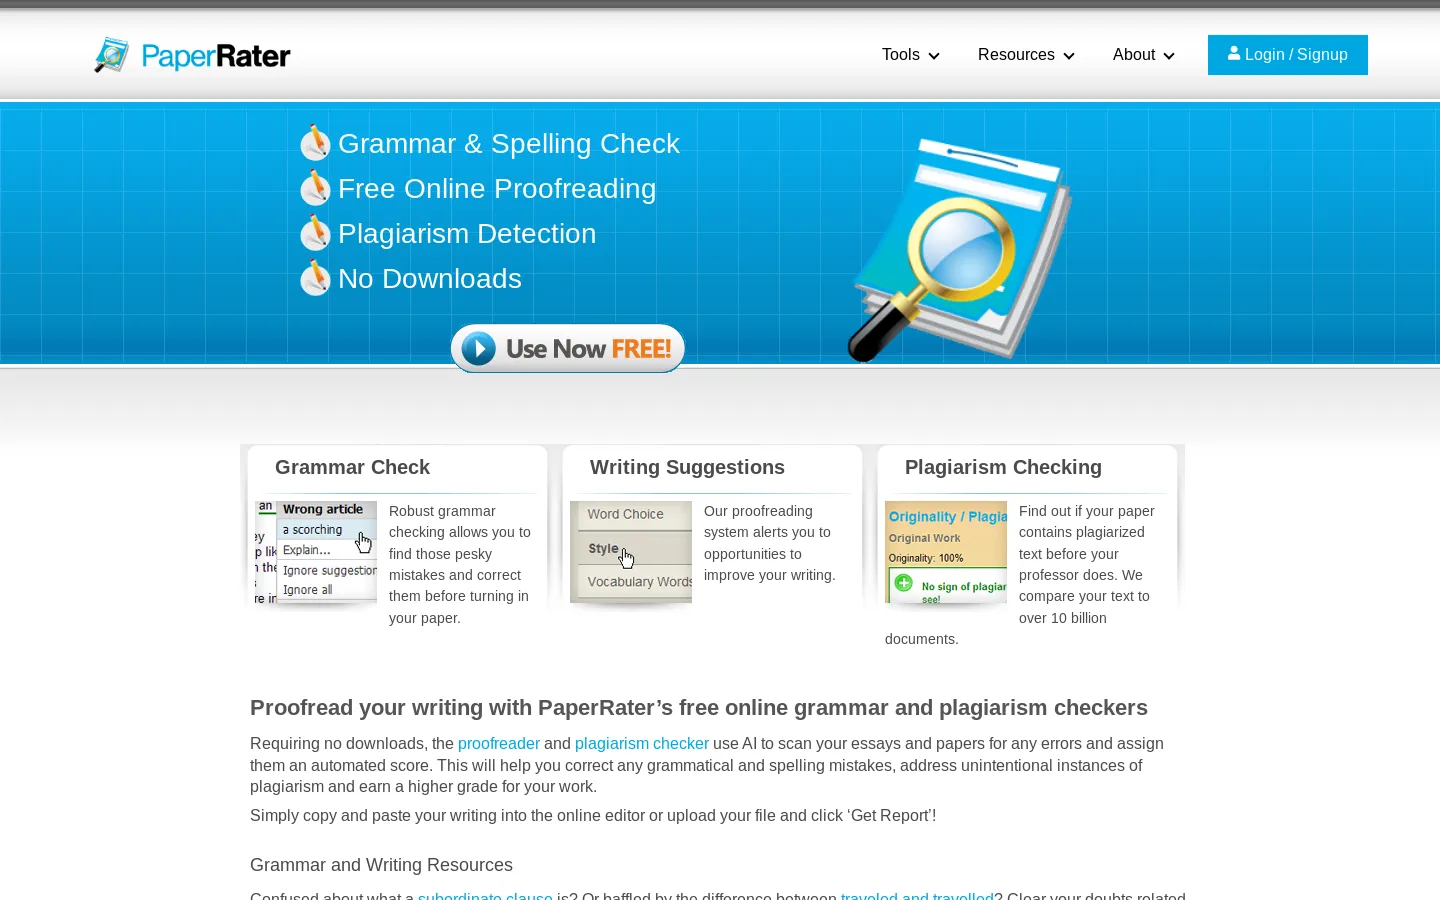 PaperRater: Free Online Proofreader with Grammar Check, Plagiarism Detection and more